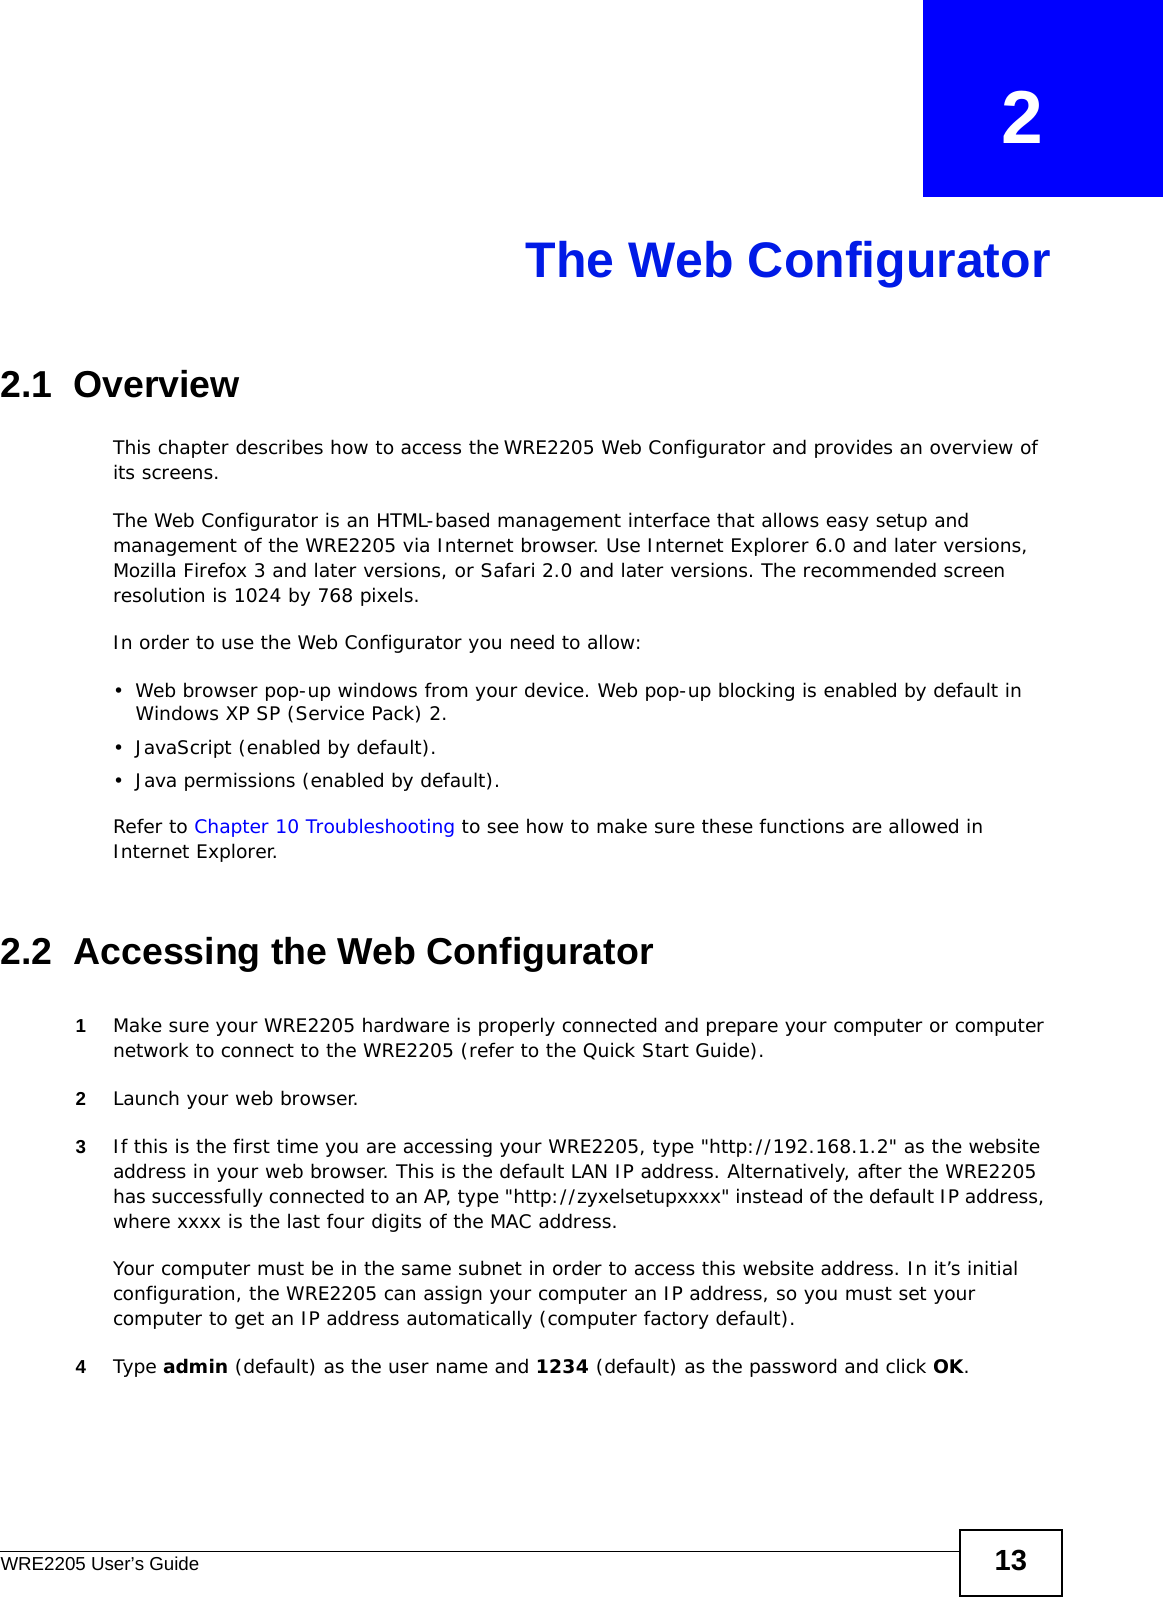 WRE2205 User’s Guide 13CHAPTER   2The Web Configurator2.1  OverviewThis chapter describes how to access the WRE2205 Web Configurator and provides an overview of its screens.The Web Configurator is an HTML-based management interface that allows easy setup and management of the WRE2205 via Internet browser. Use Internet Explorer 6.0 and later versions, Mozilla Firefox 3 and later versions, or Safari 2.0 and later versions. The recommended screen resolution is 1024 by 768 pixels.In order to use the Web Configurator you need to allow:• Web browser pop-up windows from your device. Web pop-up blocking is enabled by default in Windows XP SP (Service Pack) 2.• JavaScript (enabled by default).• Java permissions (enabled by default).Refer to Chapter 10 Troubleshooting to see how to make sure these functions are allowed in Internet Explorer.2.2  Accessing the Web Configurator1Make sure your WRE2205 hardware is properly connected and prepare your computer or computer network to connect to the WRE2205 (refer to the Quick Start Guide).2Launch your web browser.3If this is the first time you are accessing your WRE2205, type &quot;http://192.168.1.2&quot; as the website address in your web browser. This is the default LAN IP address. Alternatively, after the WRE2205 has successfully connected to an AP, type &quot;http://zyxelsetupxxxx&quot; instead of the default IP address, where xxxx is the last four digits of the MAC address.Your computer must be in the same subnet in order to access this website address. In it’s initial configuration, the WRE2205 can assign your computer an IP address, so you must set your computer to get an IP address automatically (computer factory default).4Type admin (default) as the user name and 1234 (default) as the password and click OK. 